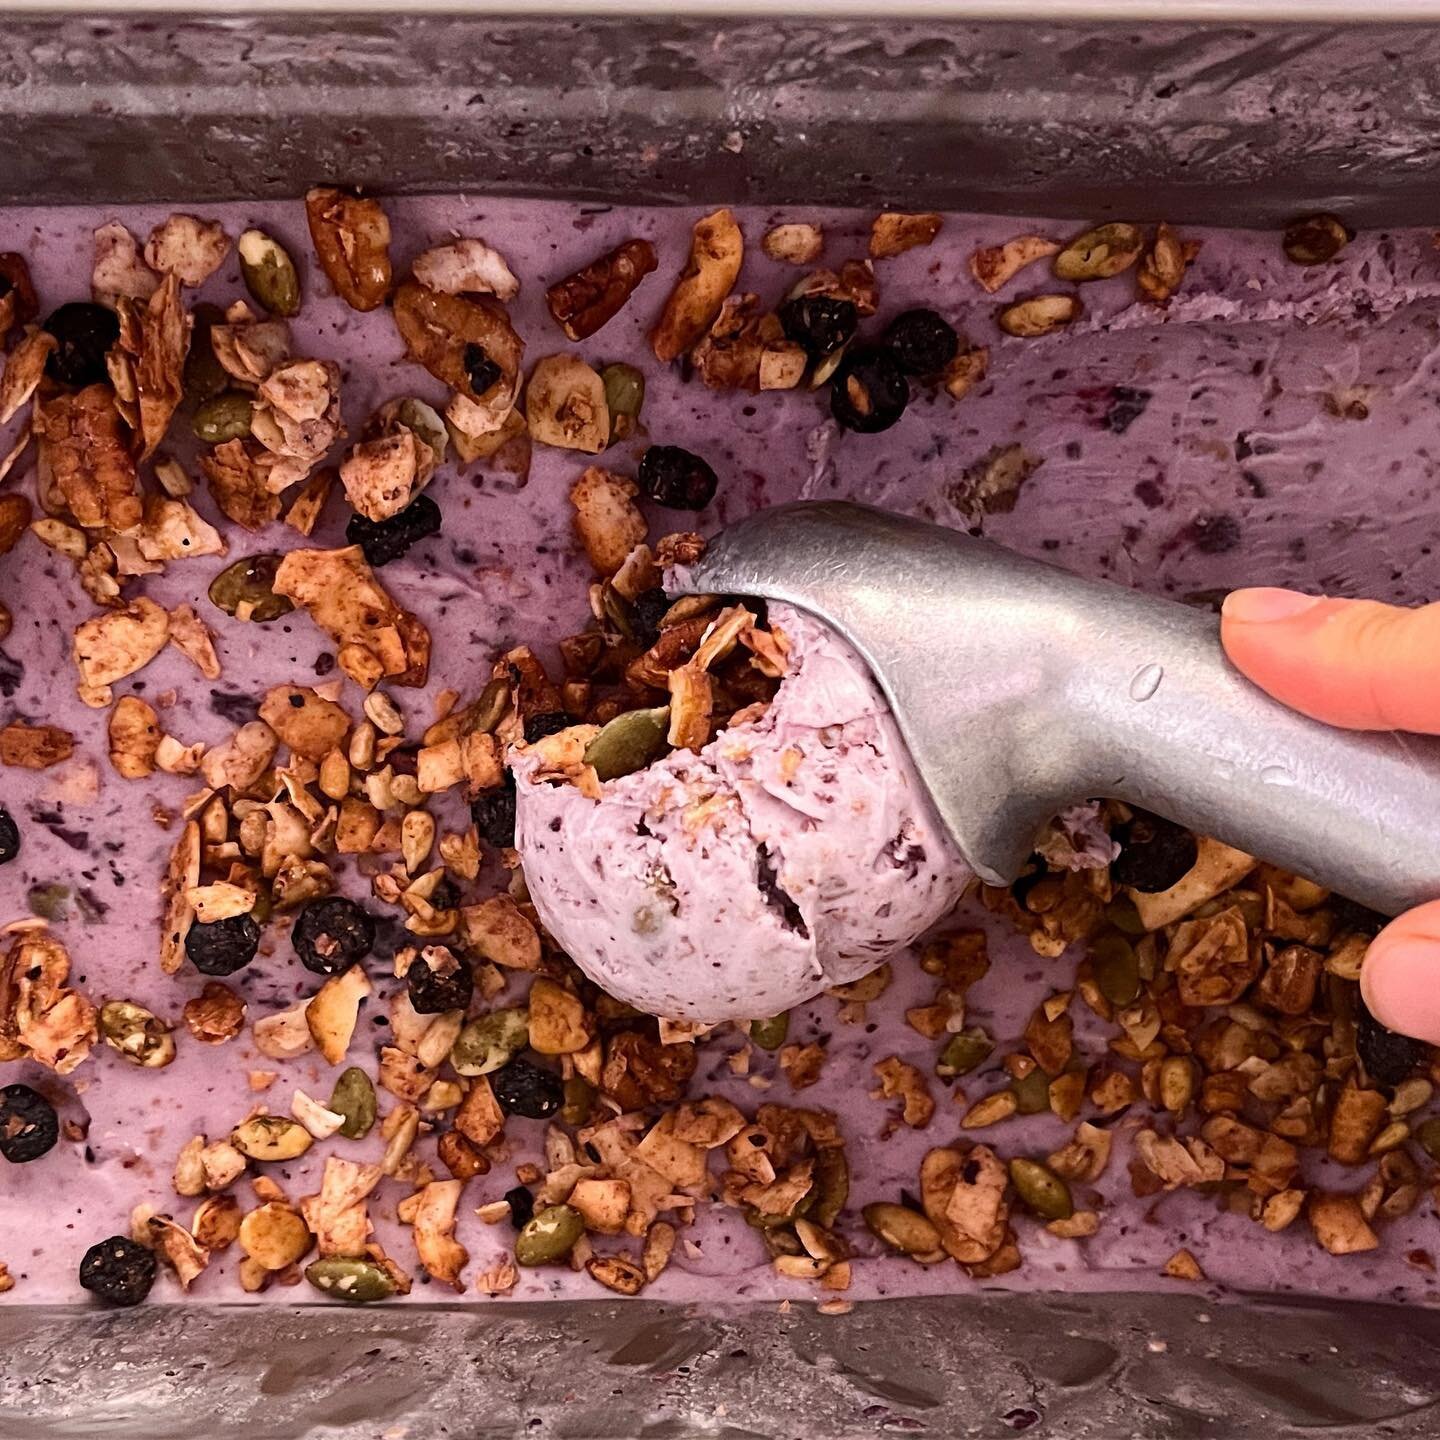 Now scooping BLUEBERRY CRUNCH at both of our locations! Blueberry based ice cream with blueberry cinnamon granola🤤🤤

Cannot get enough of this flavor! Come give it a try. 

Shop Hours 
SH: 12-8pm
KY: 2-8pm 

#spokane #icecream #artisanicecream #Spo